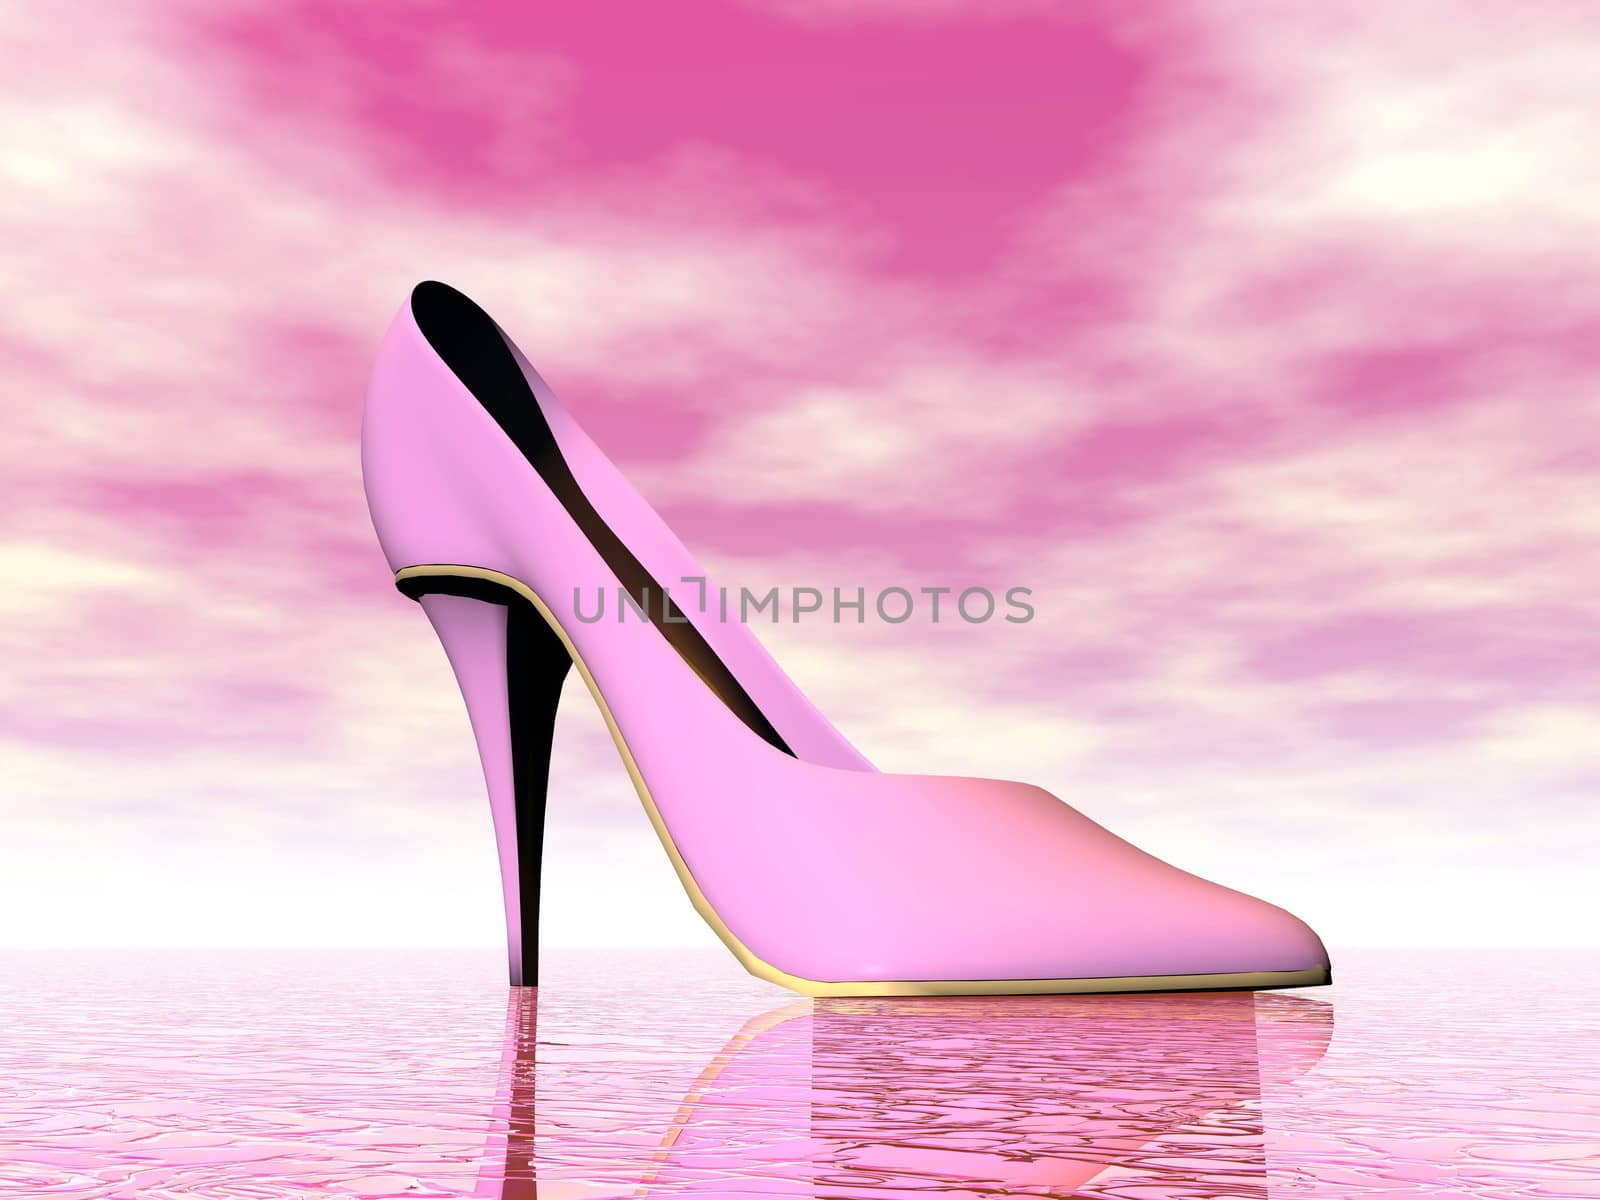 One pink high heel by cloudy day